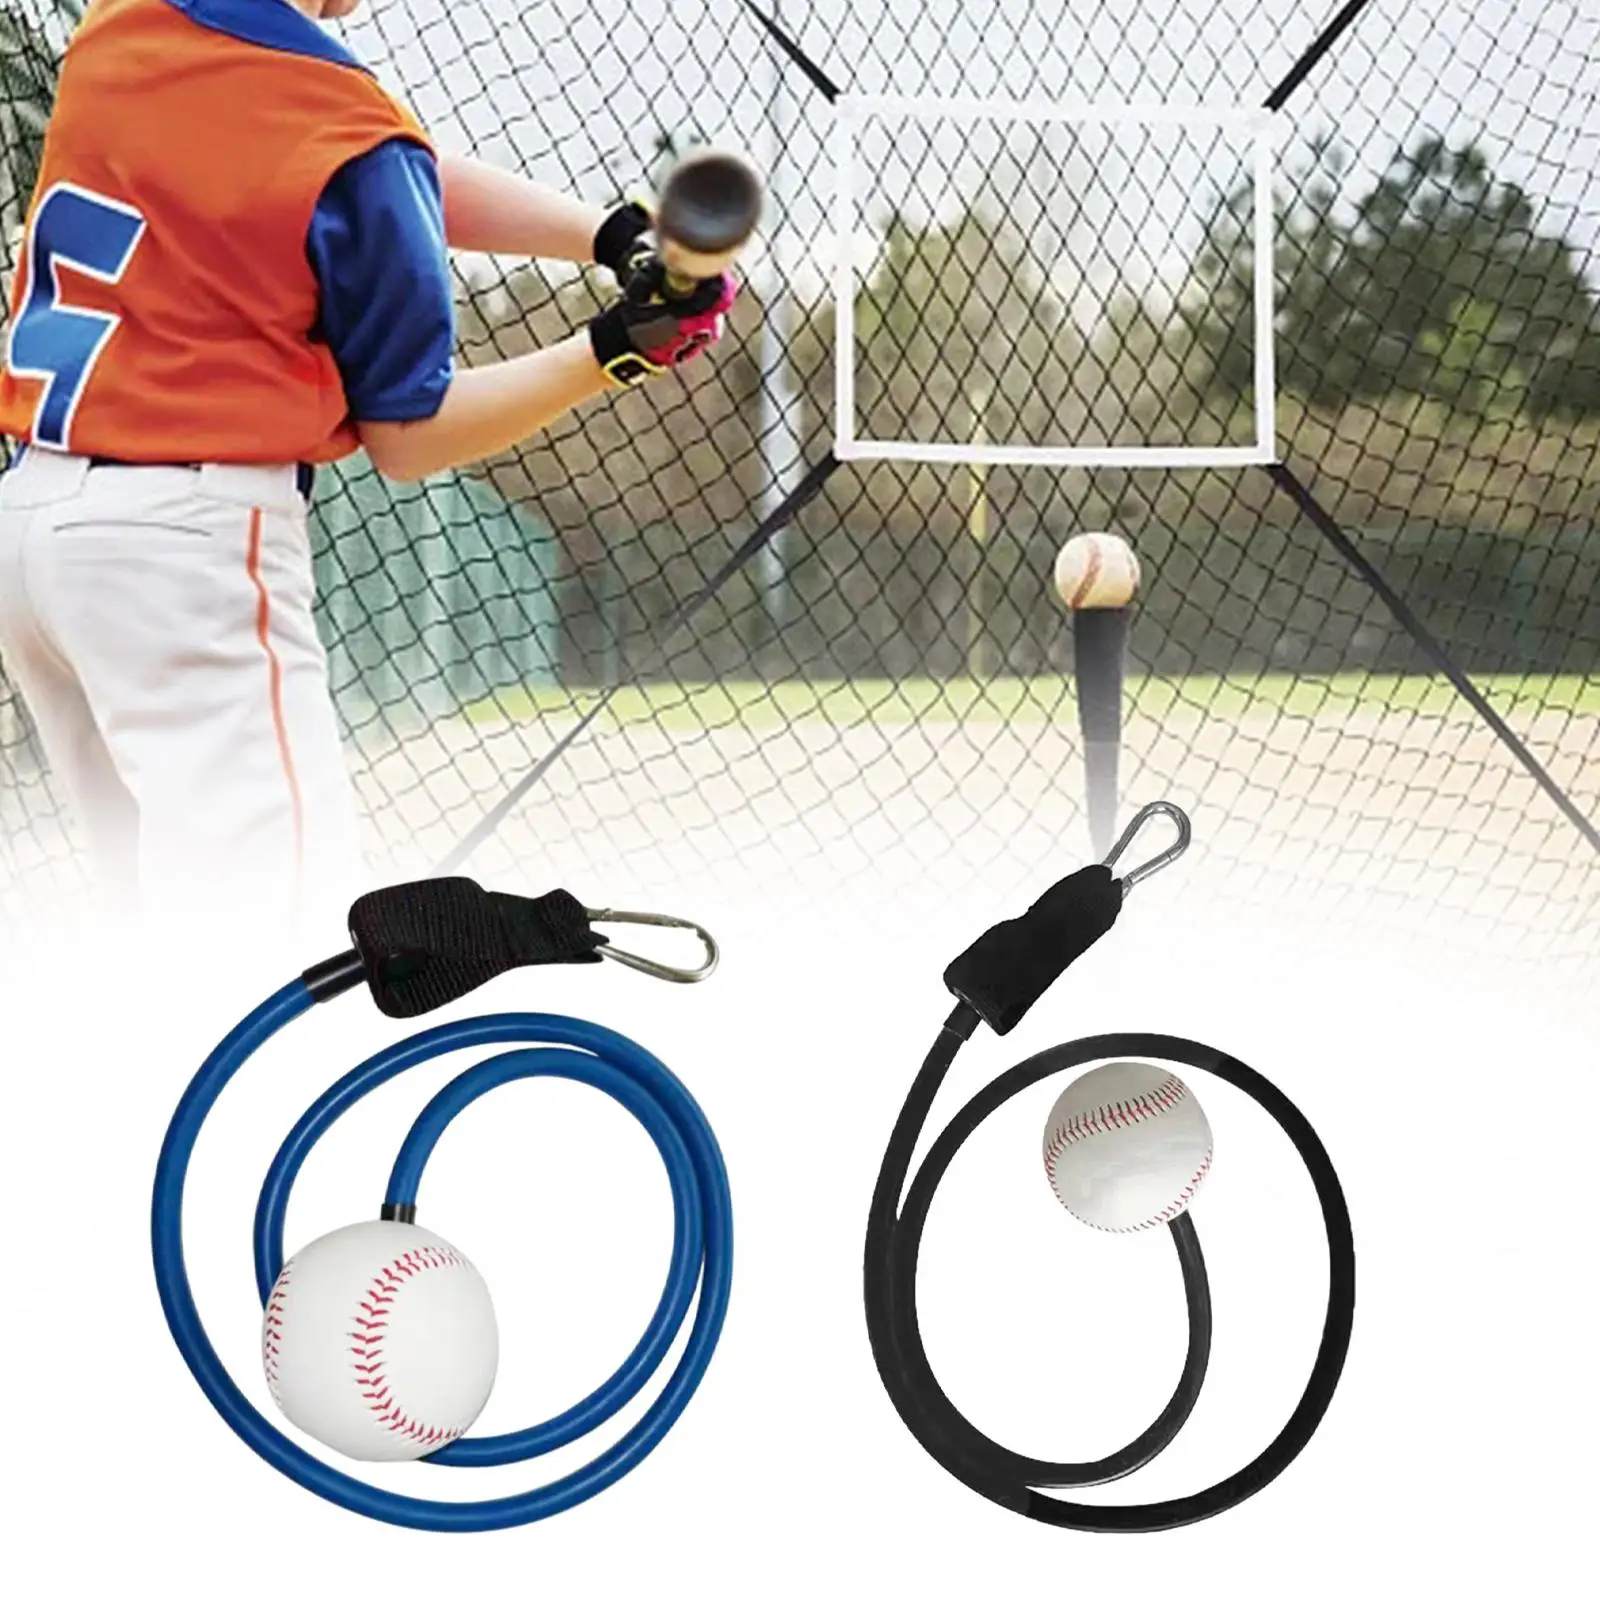 Baseball Pitching Bands Softball Training Aid Portable Elastic Band for Beginners Throwing Workout Stretch Arm Fitness Equipment